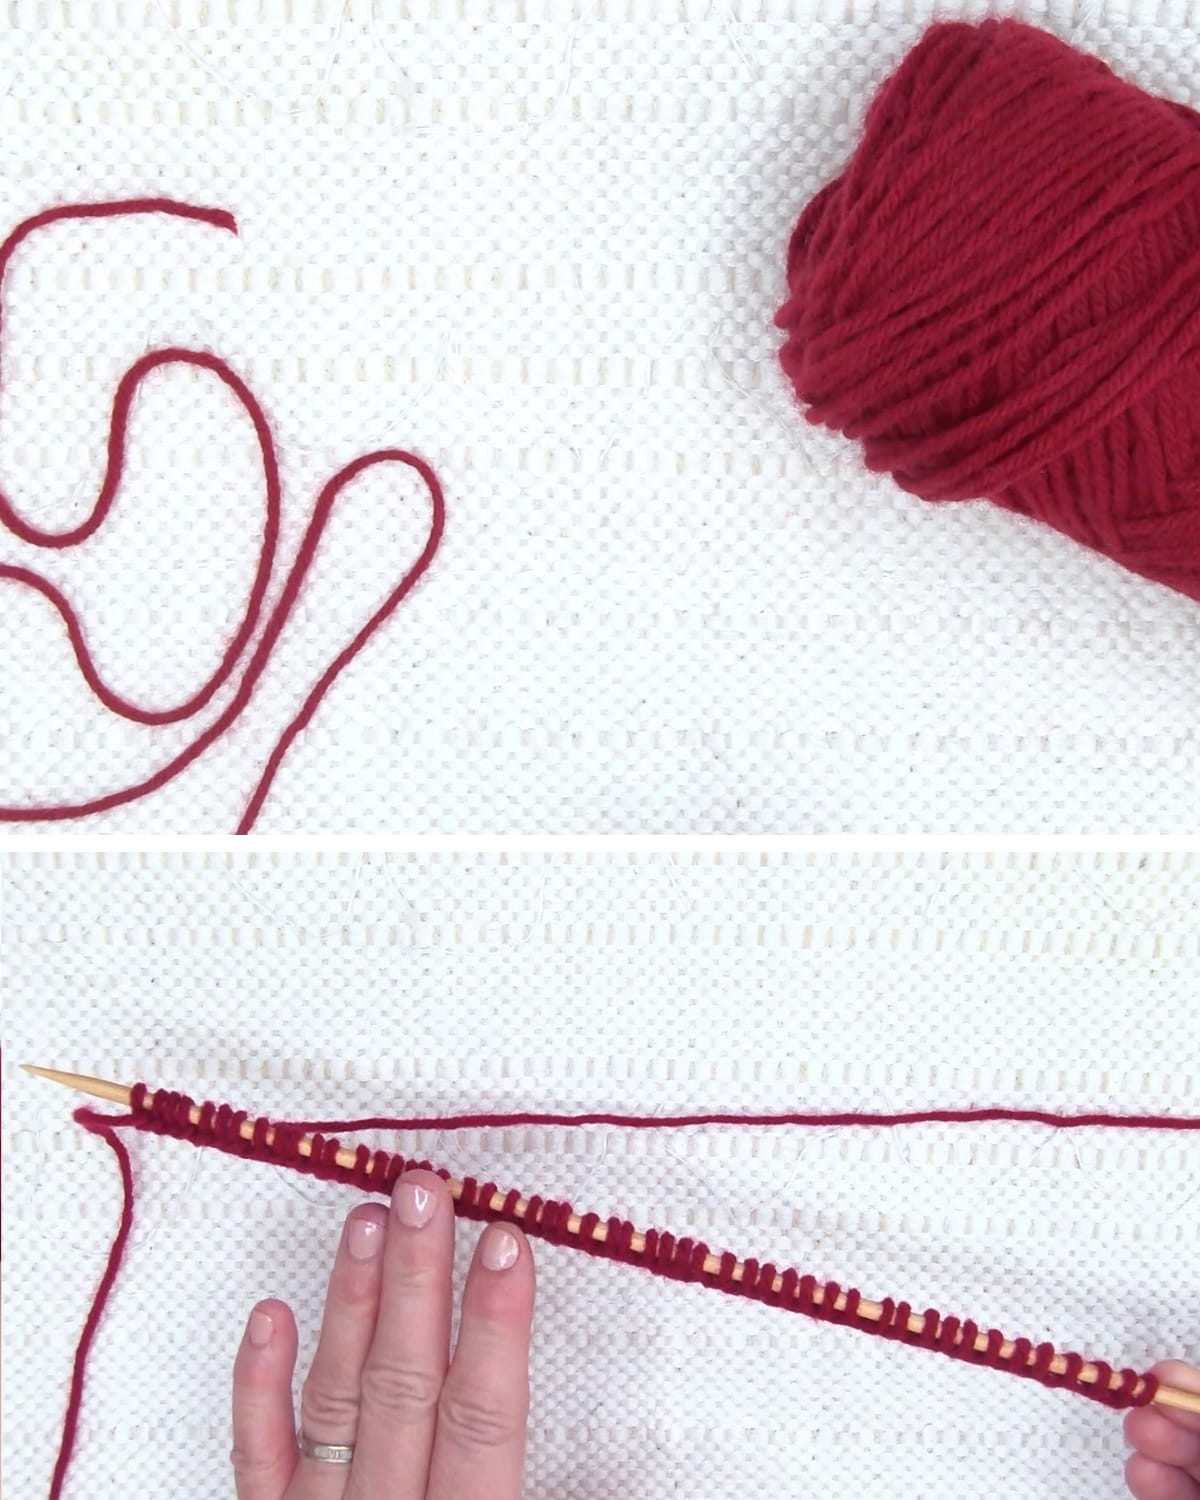 Casting on 50 stitches onto a knitting needle in burgundy color yarn for a scarf.